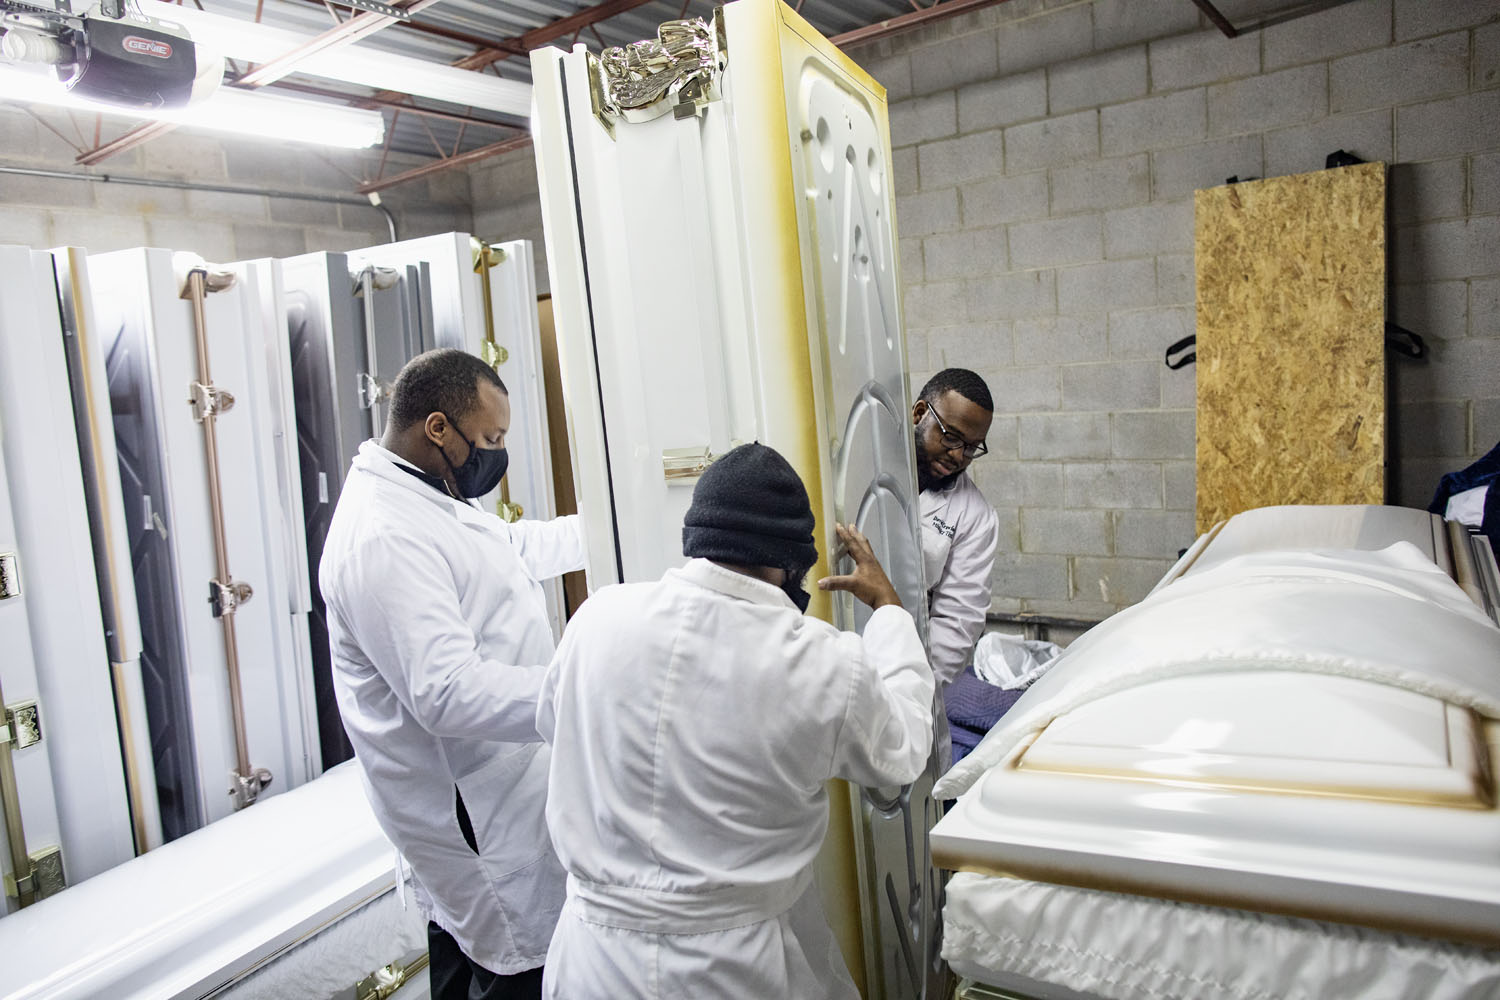 Workers move a casket in a storage room at Lucas Memorial Chapel. Garfield Heights, OH, April 2021.